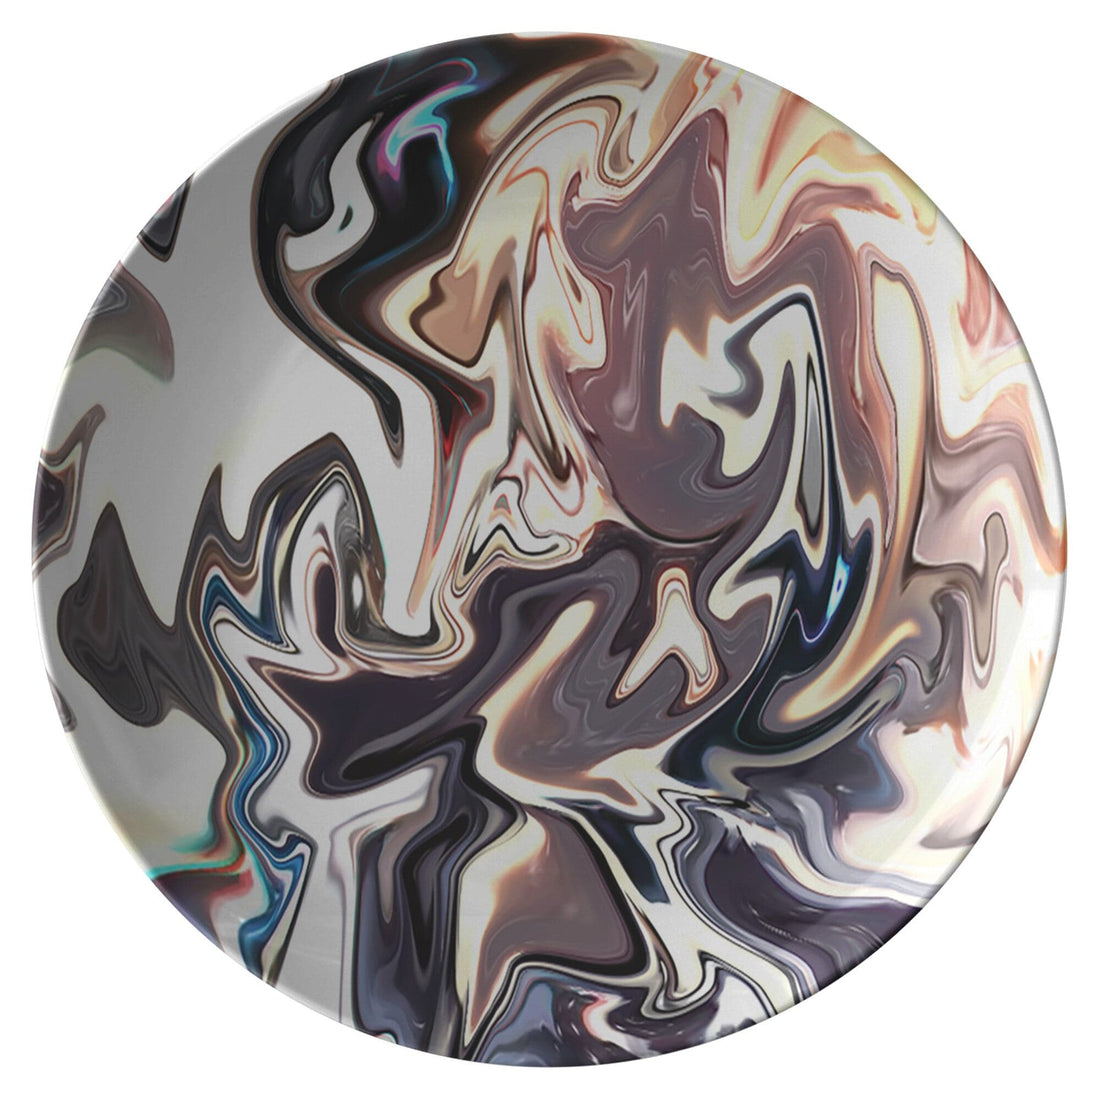 Kate McEnroe New York Dinner Plate in Yellow Gold and Brown Abstract Liquid Marble PrintPlates9820SINGLE